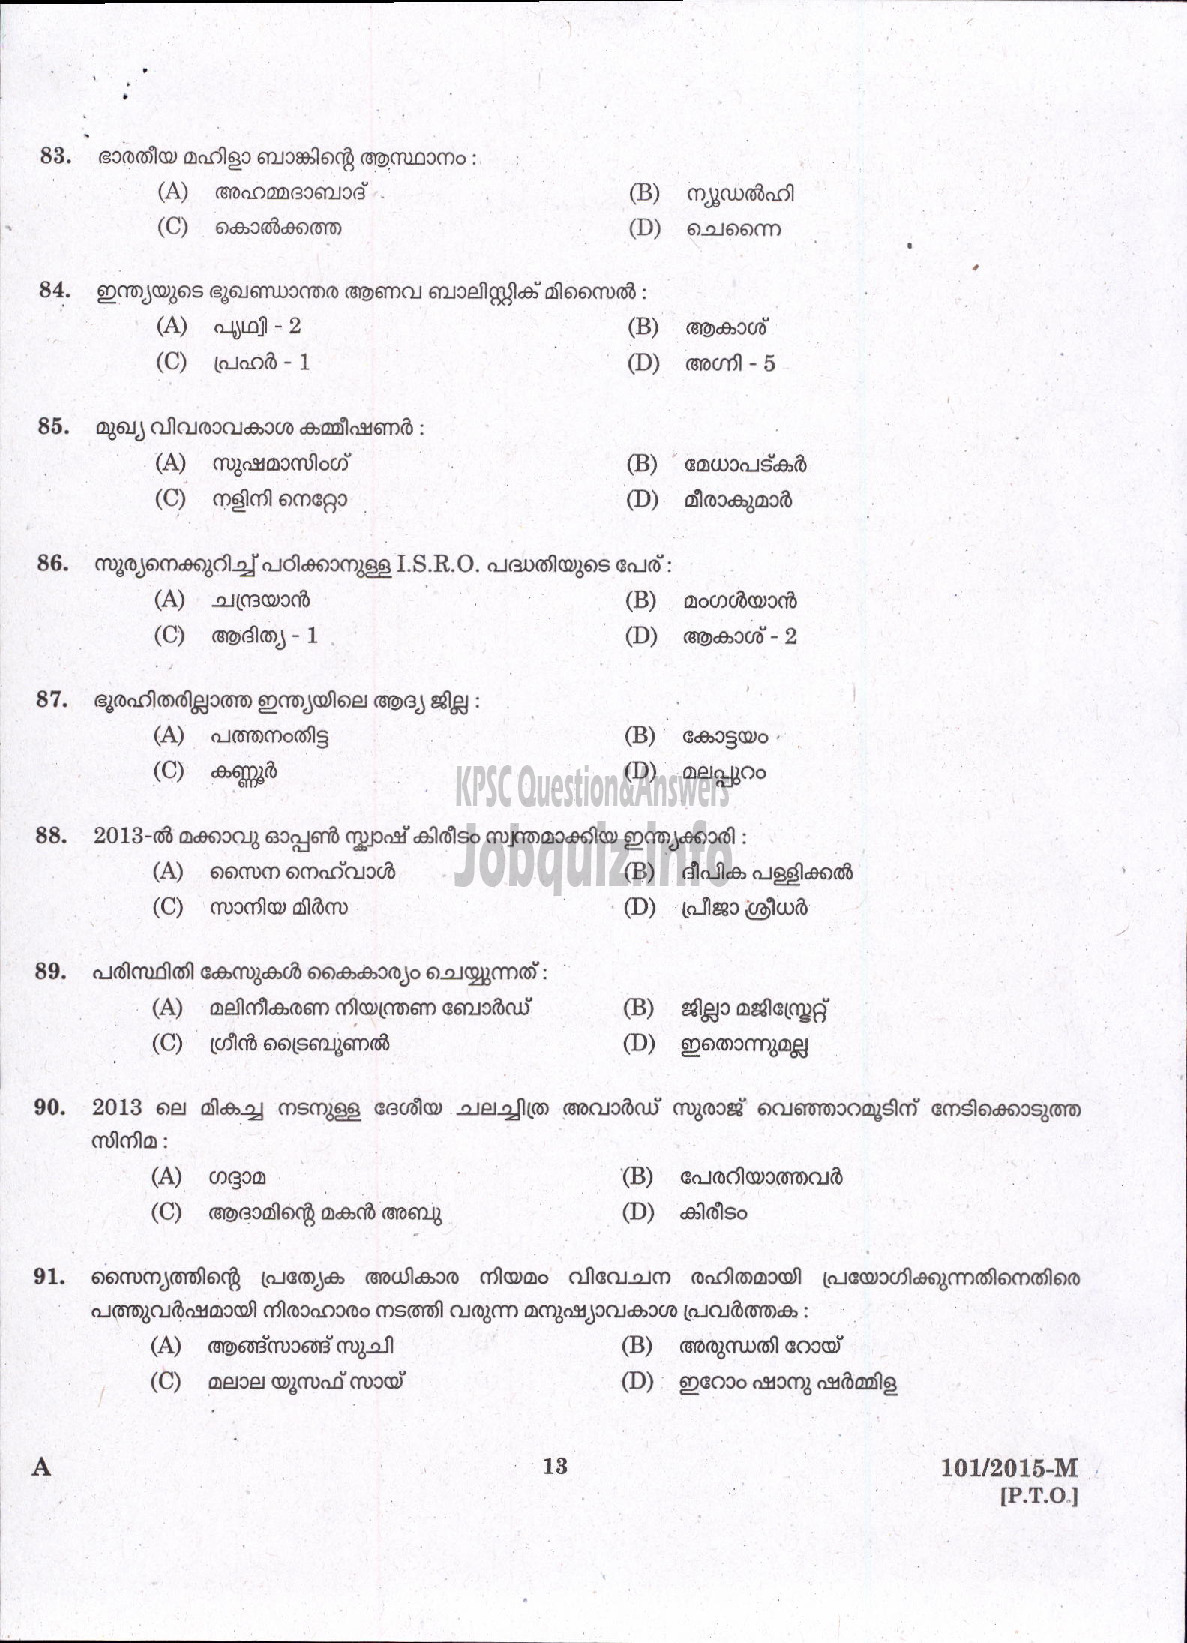 Kerala PSC Question Paper - FIREMAN DRIVER CUM PUMP OPERATOR TRAINEE FIRE AND RESCUE SERVICES ( Malayalam ) -11